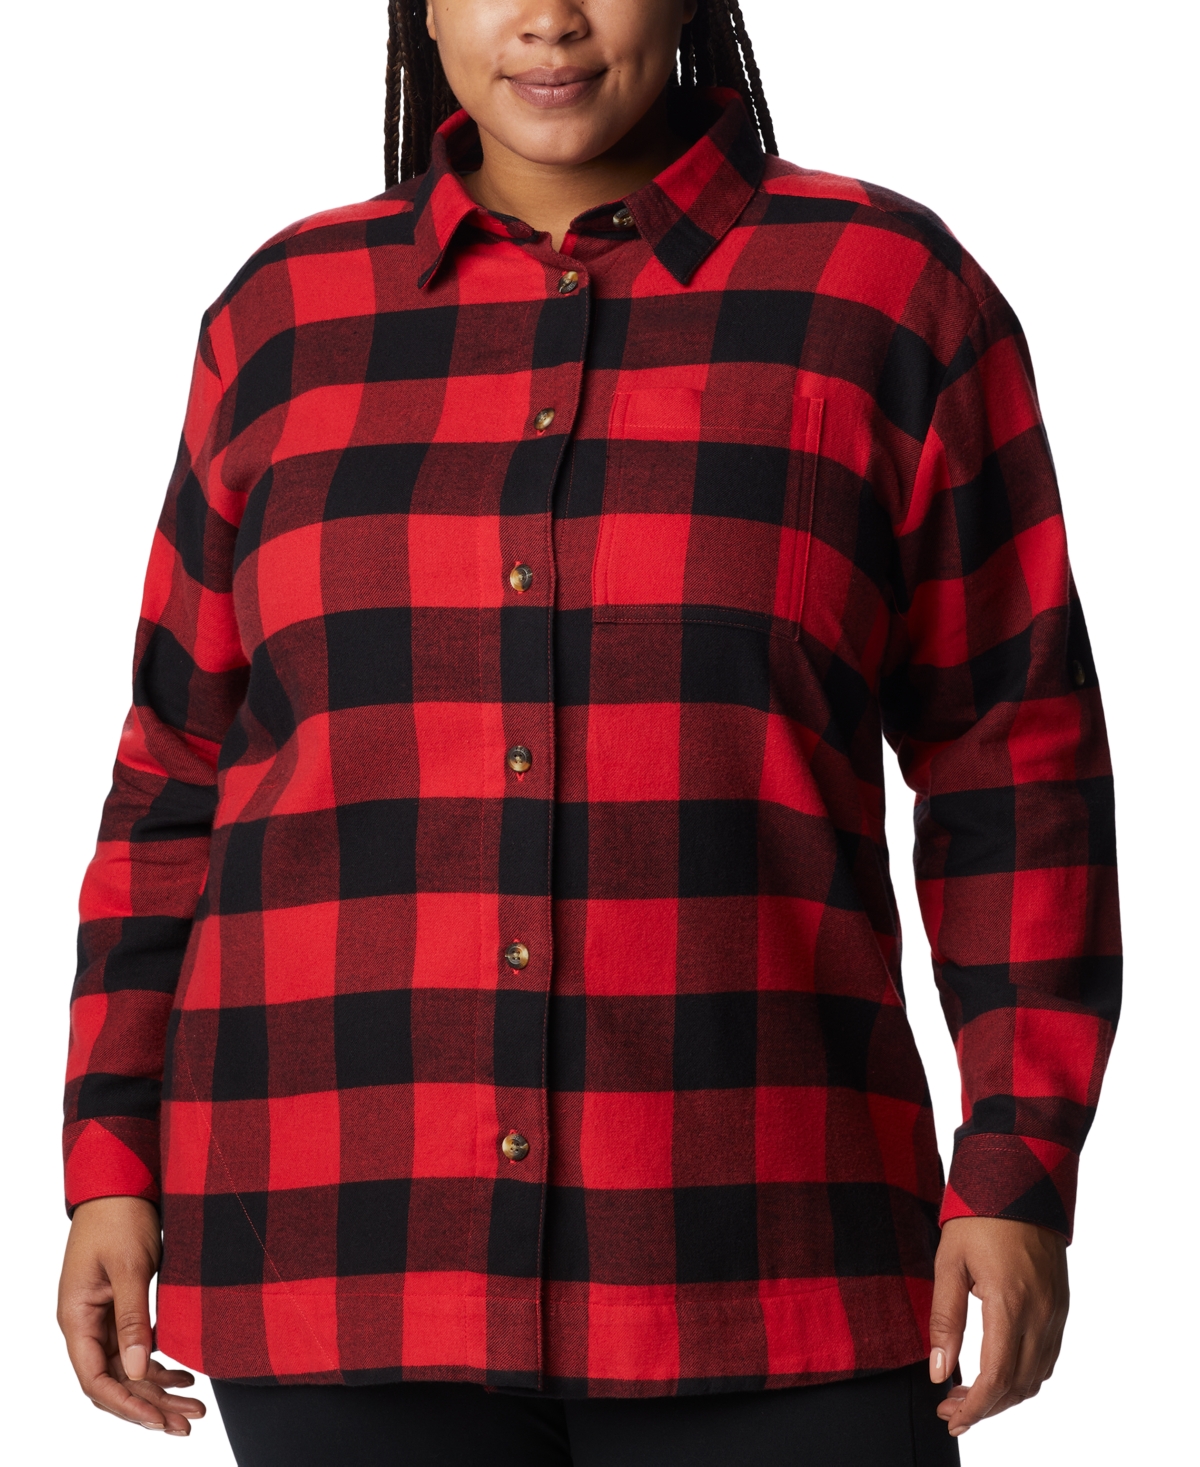 COLUMBIA PLUS SIZE HOLLY HIDEAWAY COTTON CHECKED FLANNEL TUNIC SHIRT